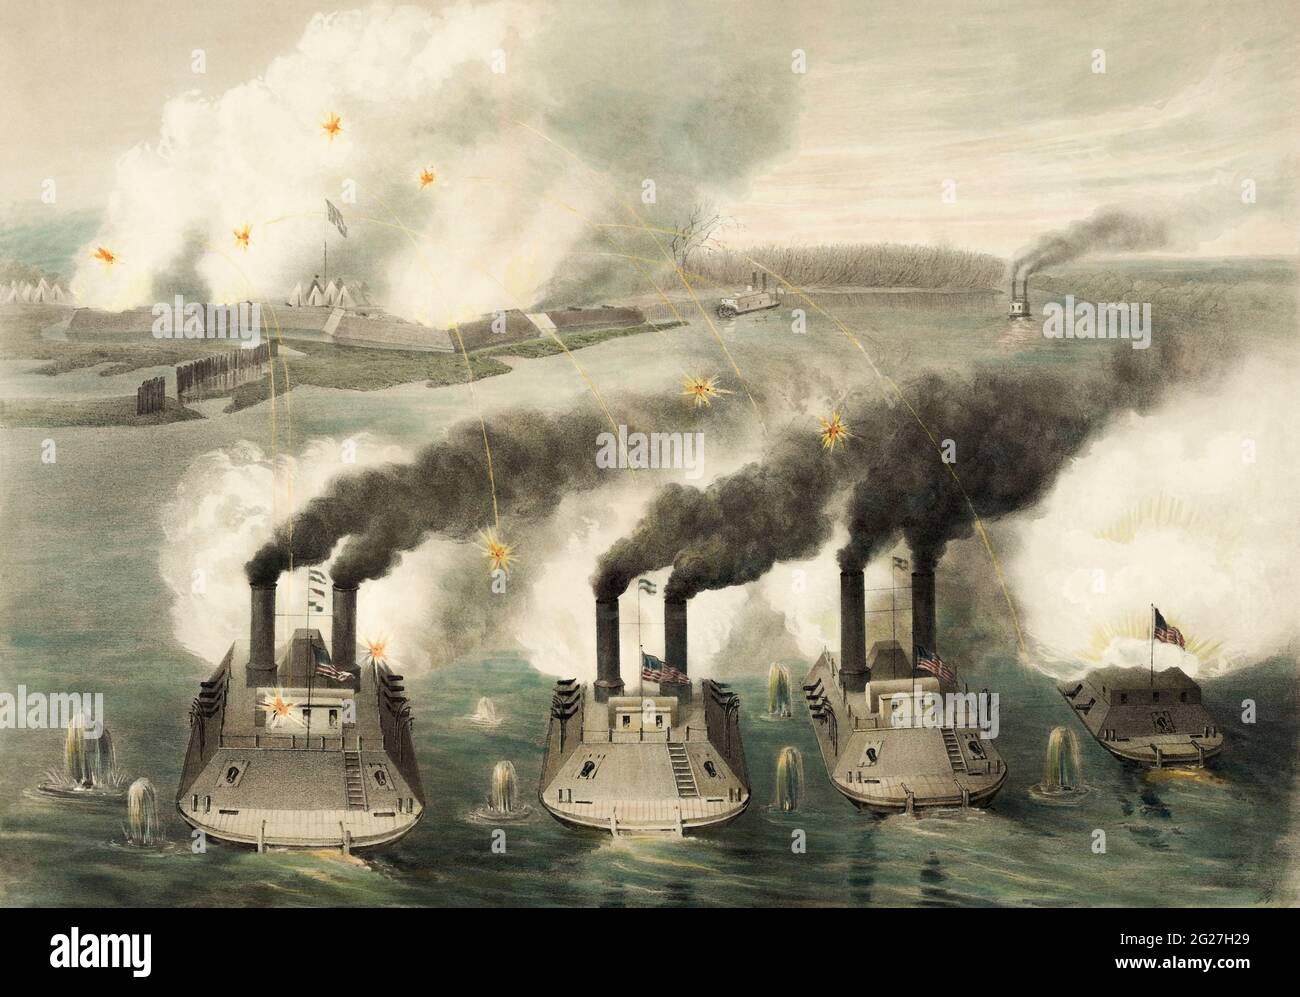 American Civil War print of four Union ironclad ships attacking Fort Henry. Stock Photo